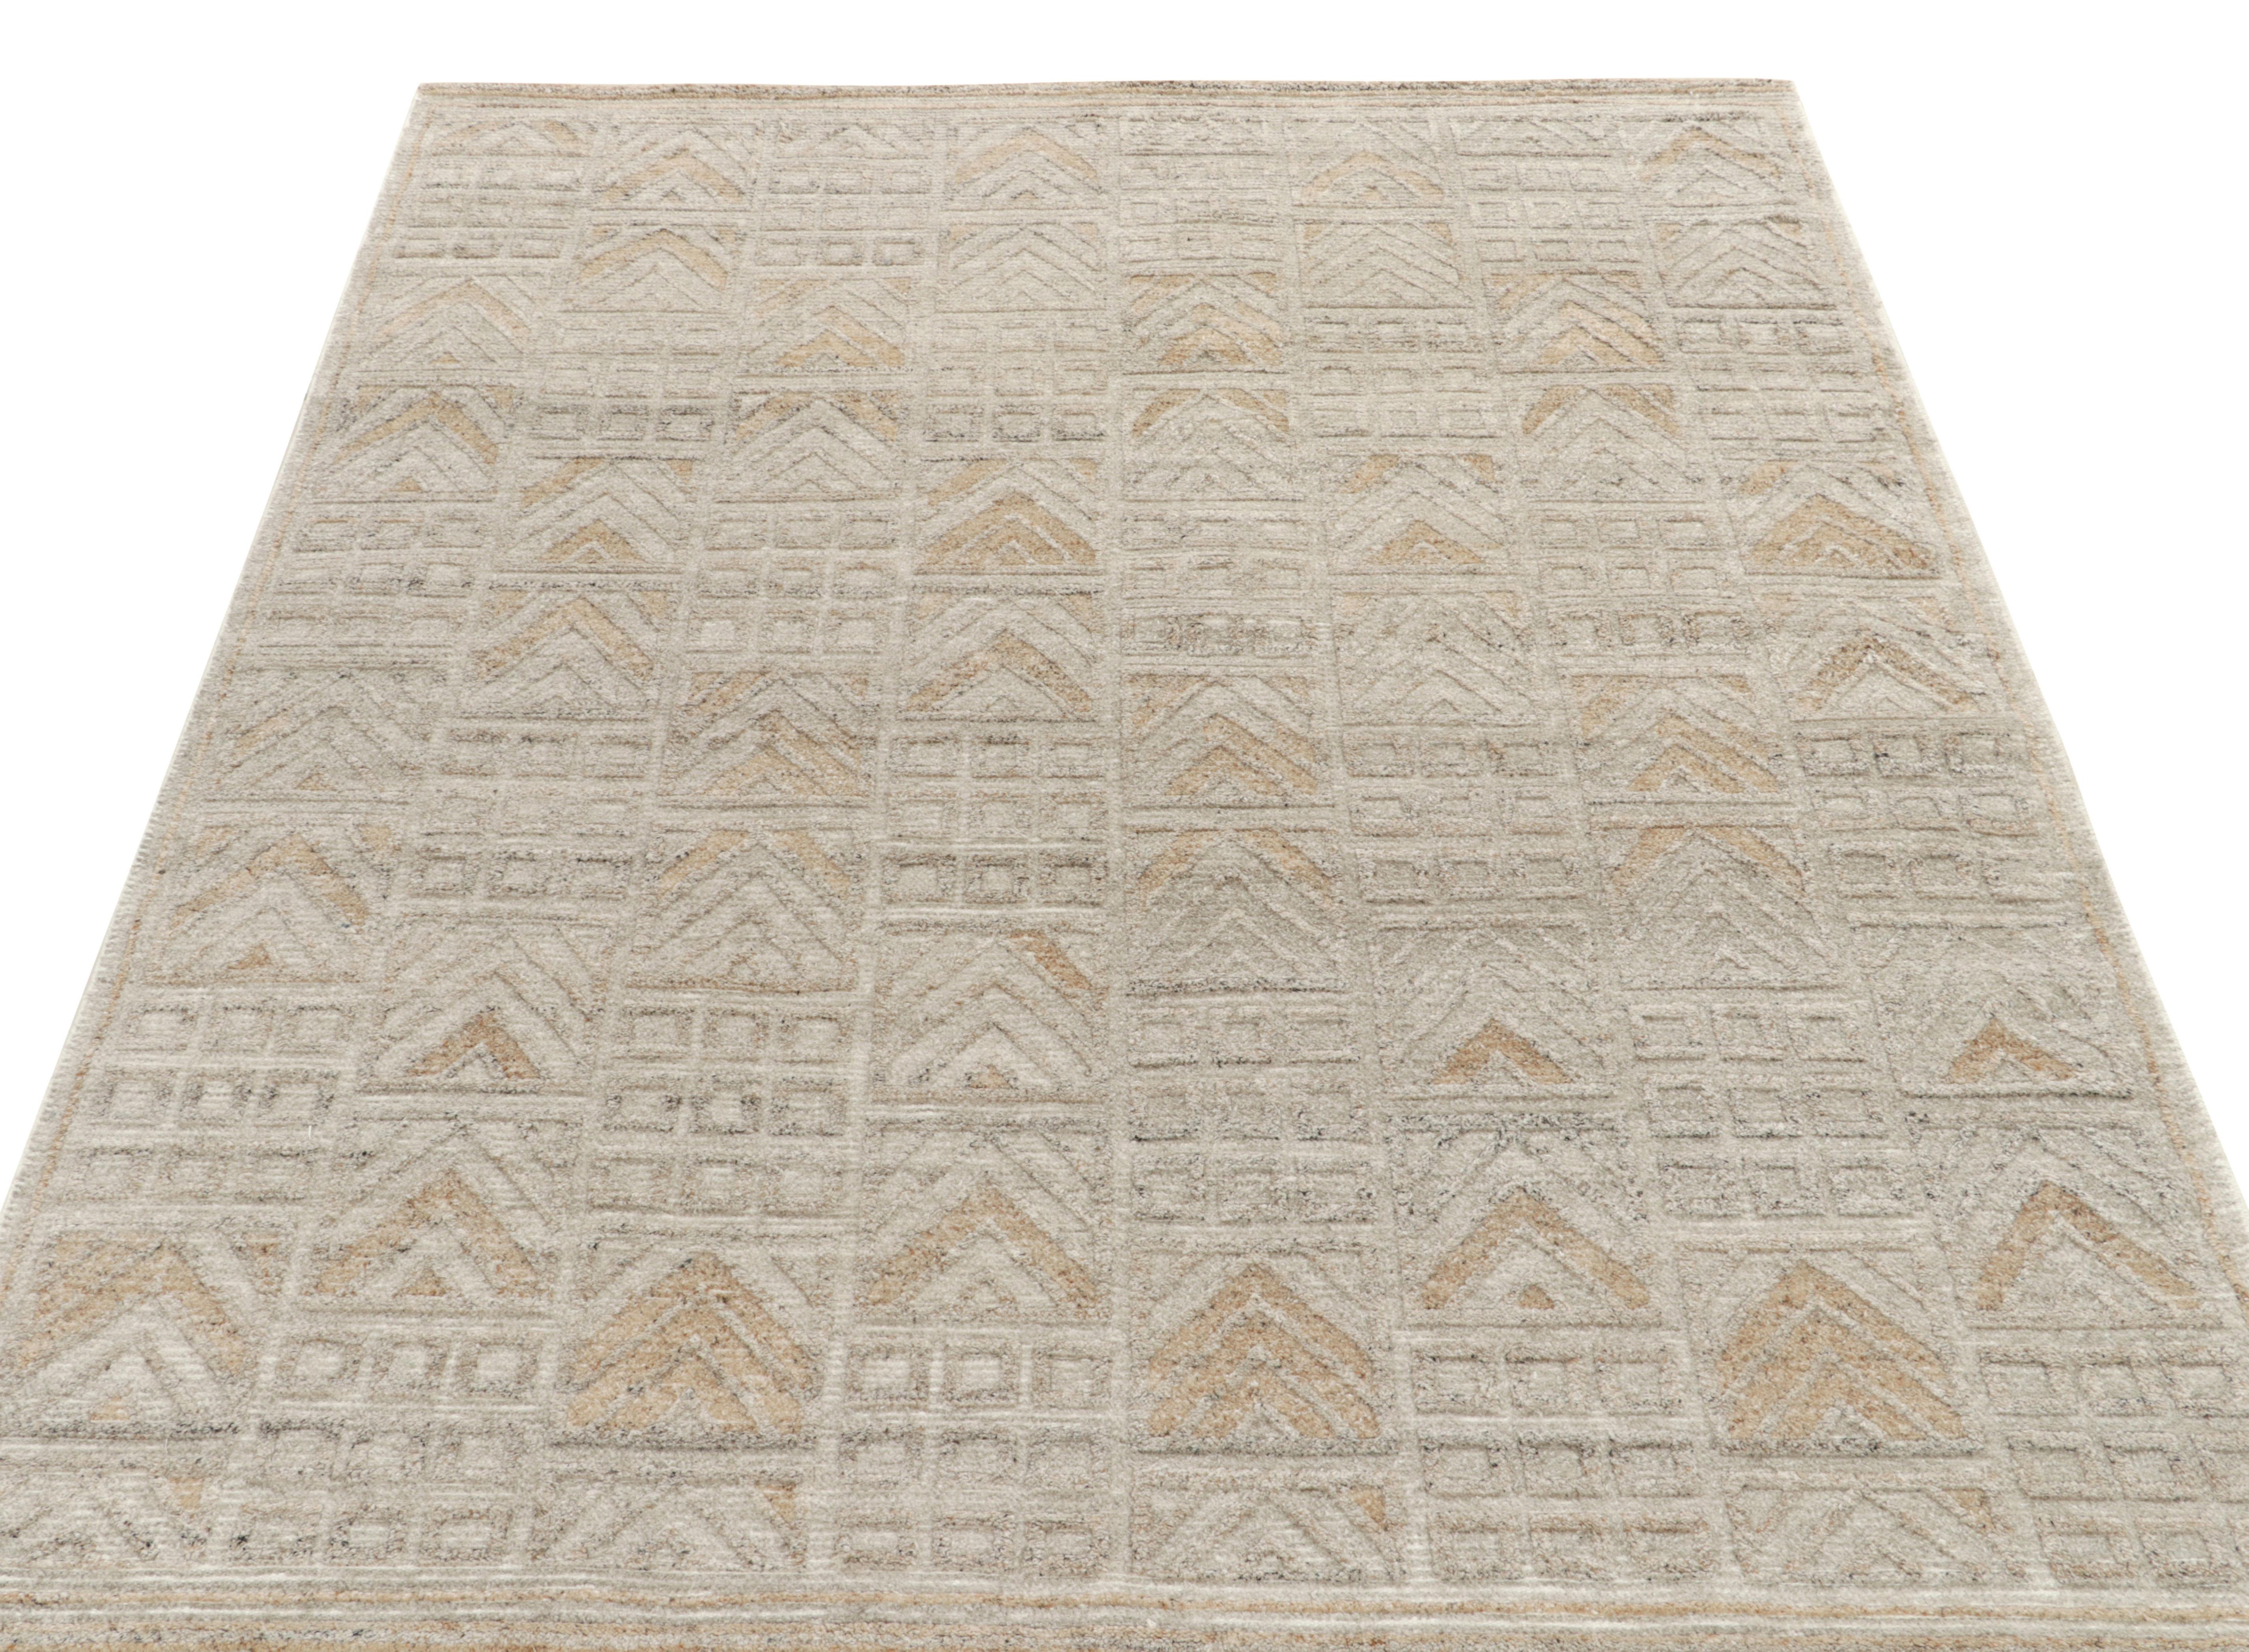 An custom hand-knotted area rug design, available from Rug & Kilim’s award winning Scandinavian selections. The Swedish Deco style beams with a refined geometric pattern in a lustrous white, gray & beige-brown pattern complementing the healthy pile.